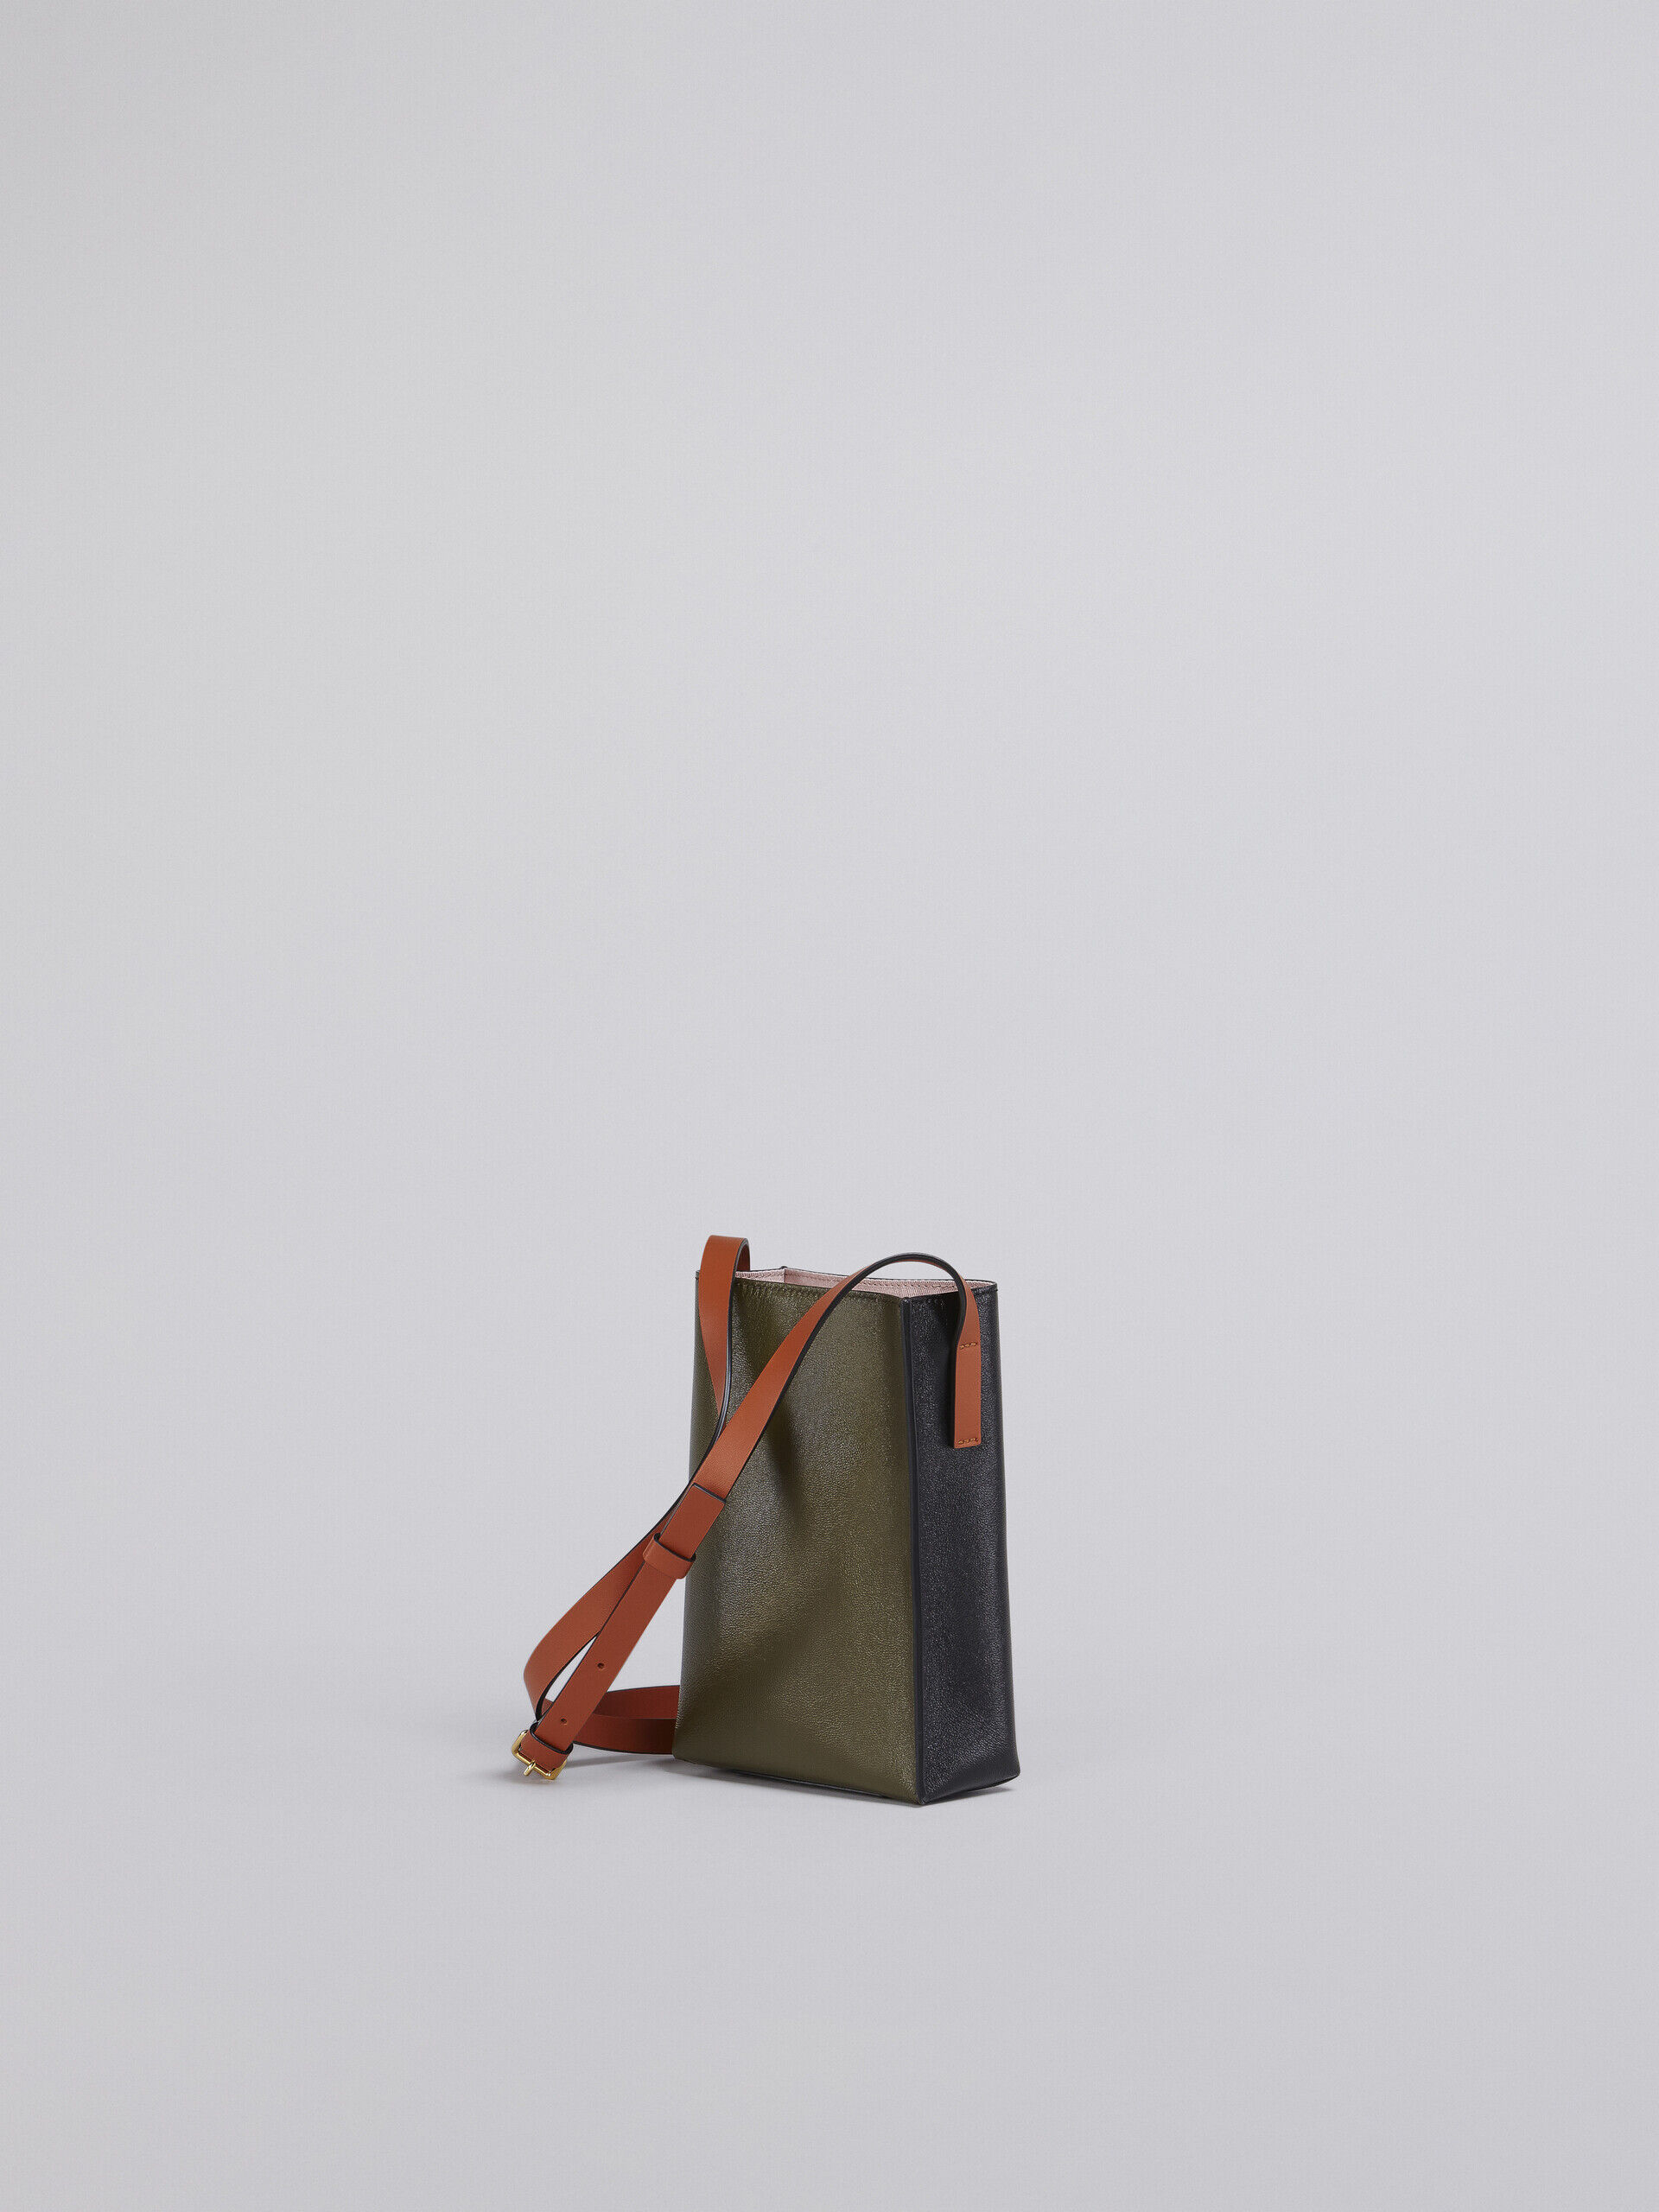 Museo Soft Nano Bag in green and black leather | Marni